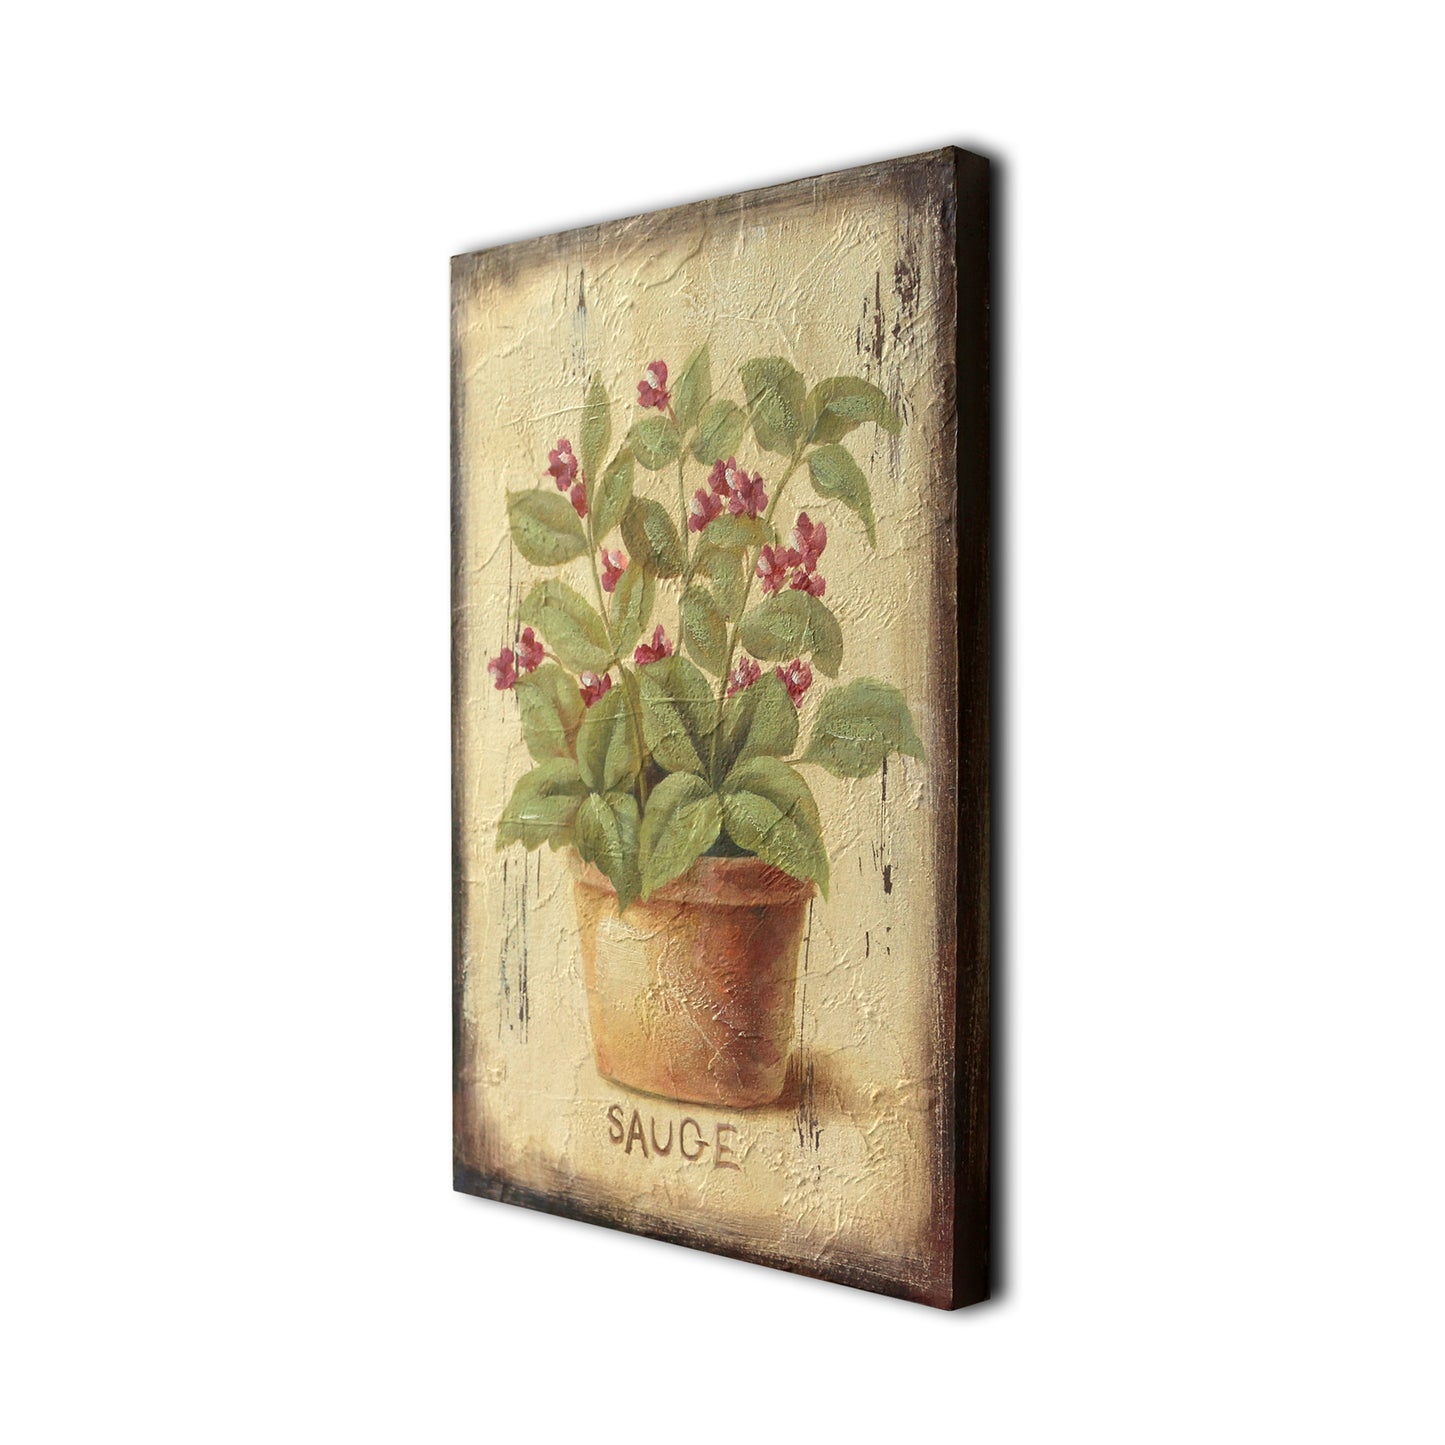 CVHOMEDECO. Primitive Antique Hand Painted Wooden Frame Wall Hanging 3D Painting Decoration Art, Plant in Terracotta Design, 8 x 12 Inch